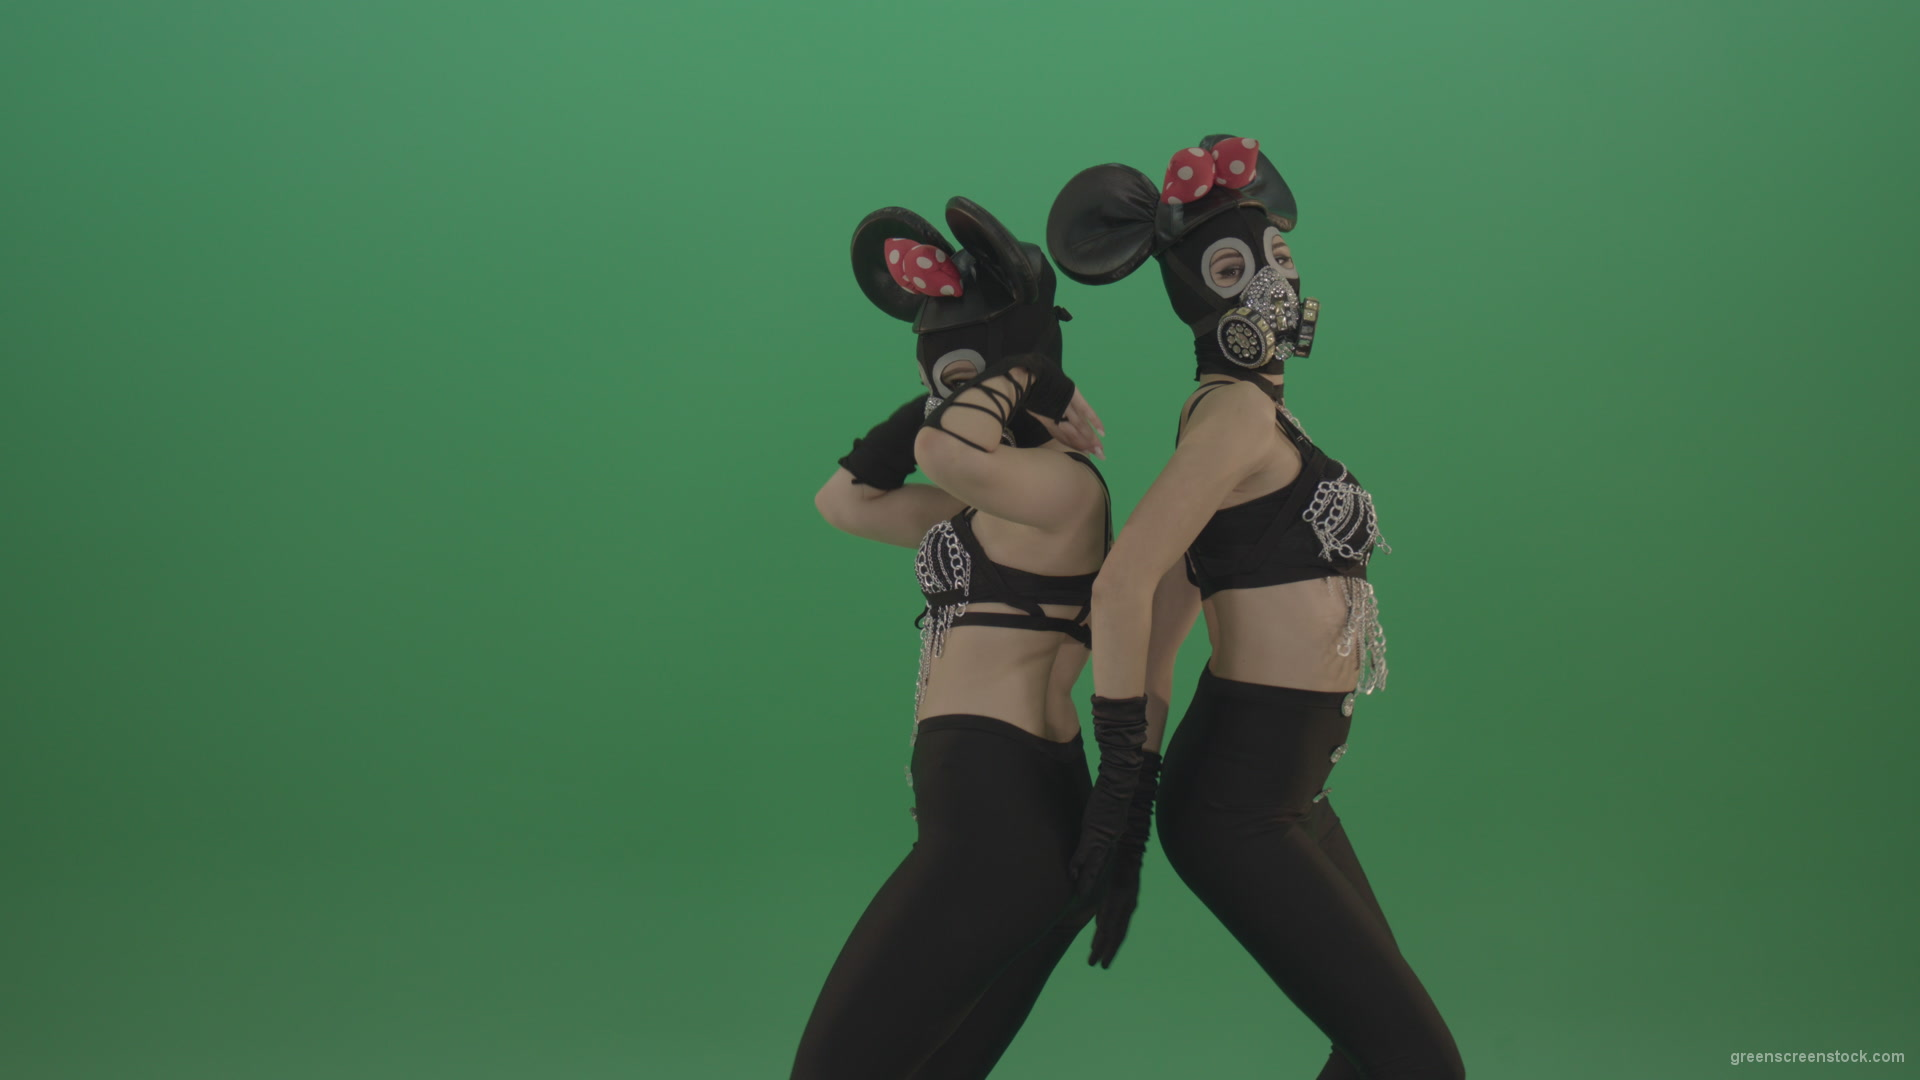 Girls-dressed-Mickey-Mouse-dance-well-on-green-screen_004 Green Screen Stock